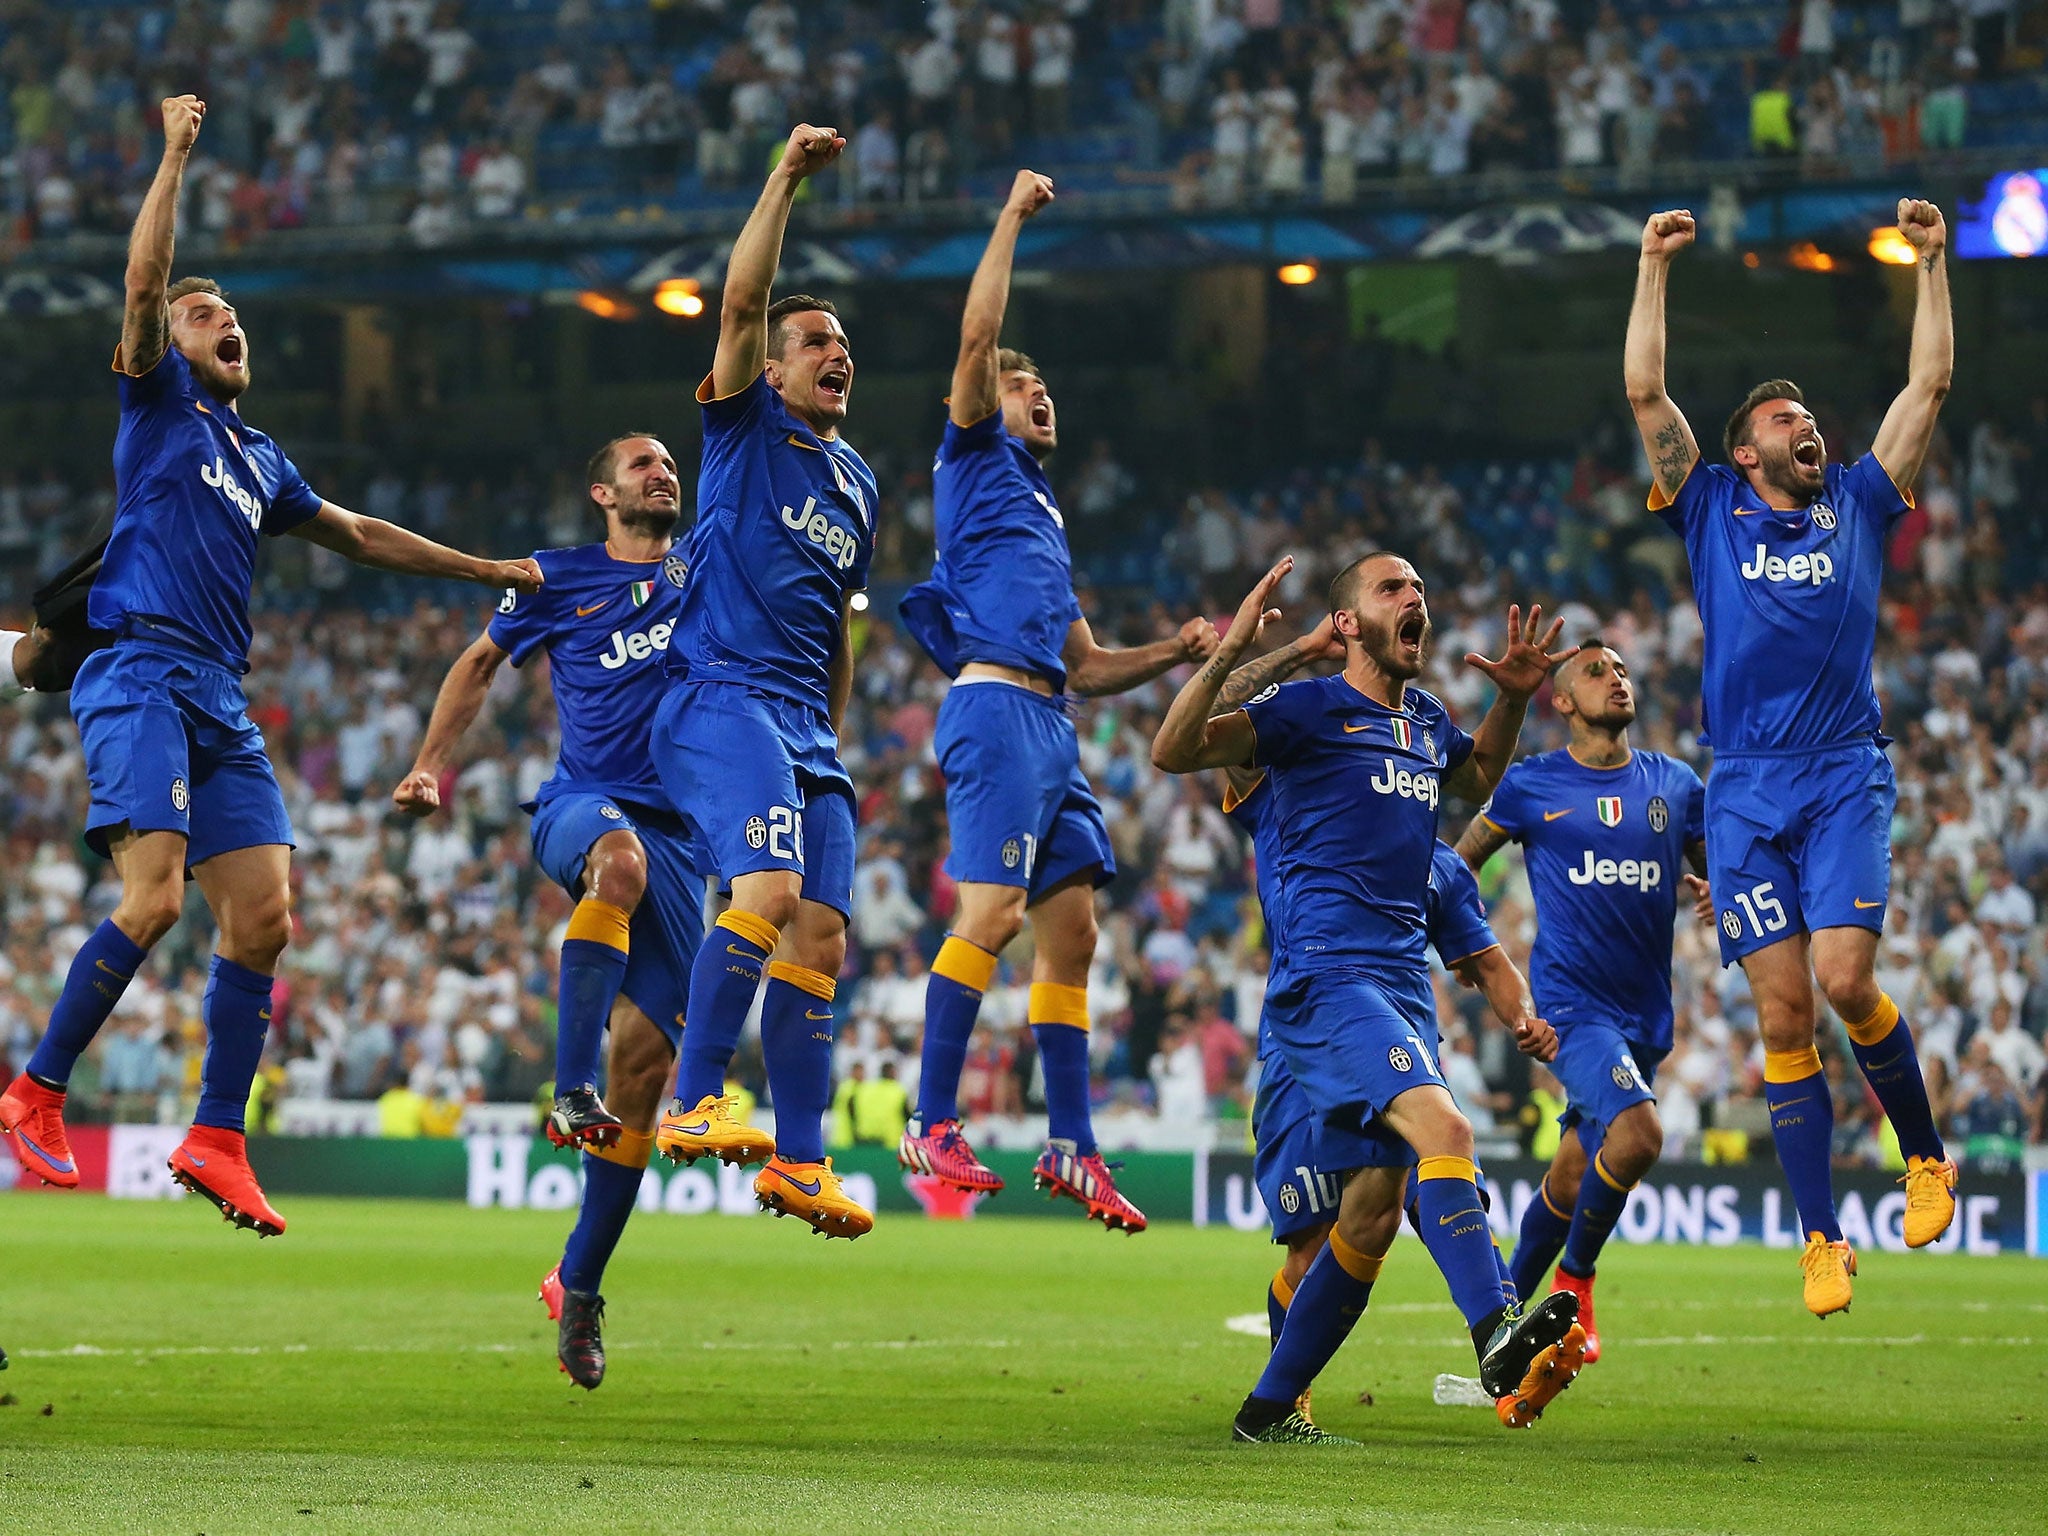 Juventus players celebrate their Champions League semi-final win over Real Madrid